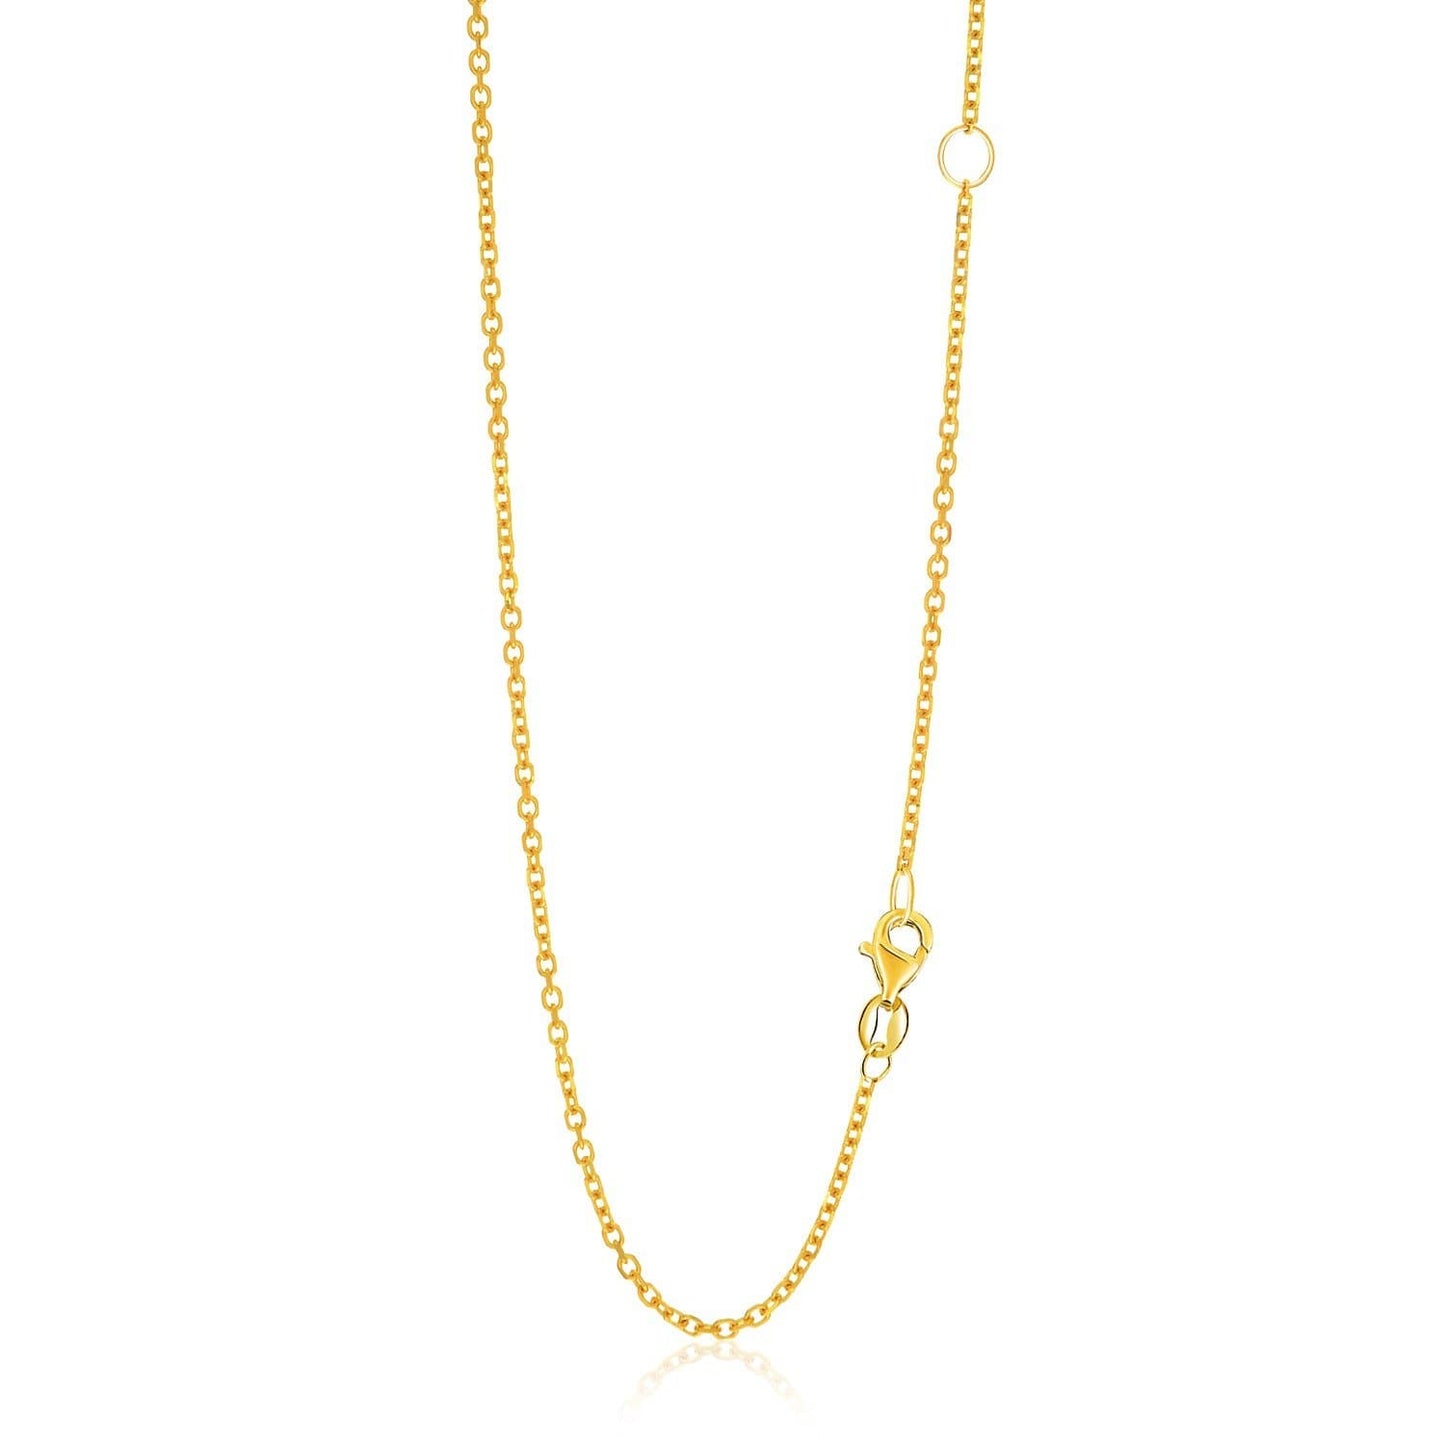 14k Yellow Gold Adjustable Cable Chain 1.5mm